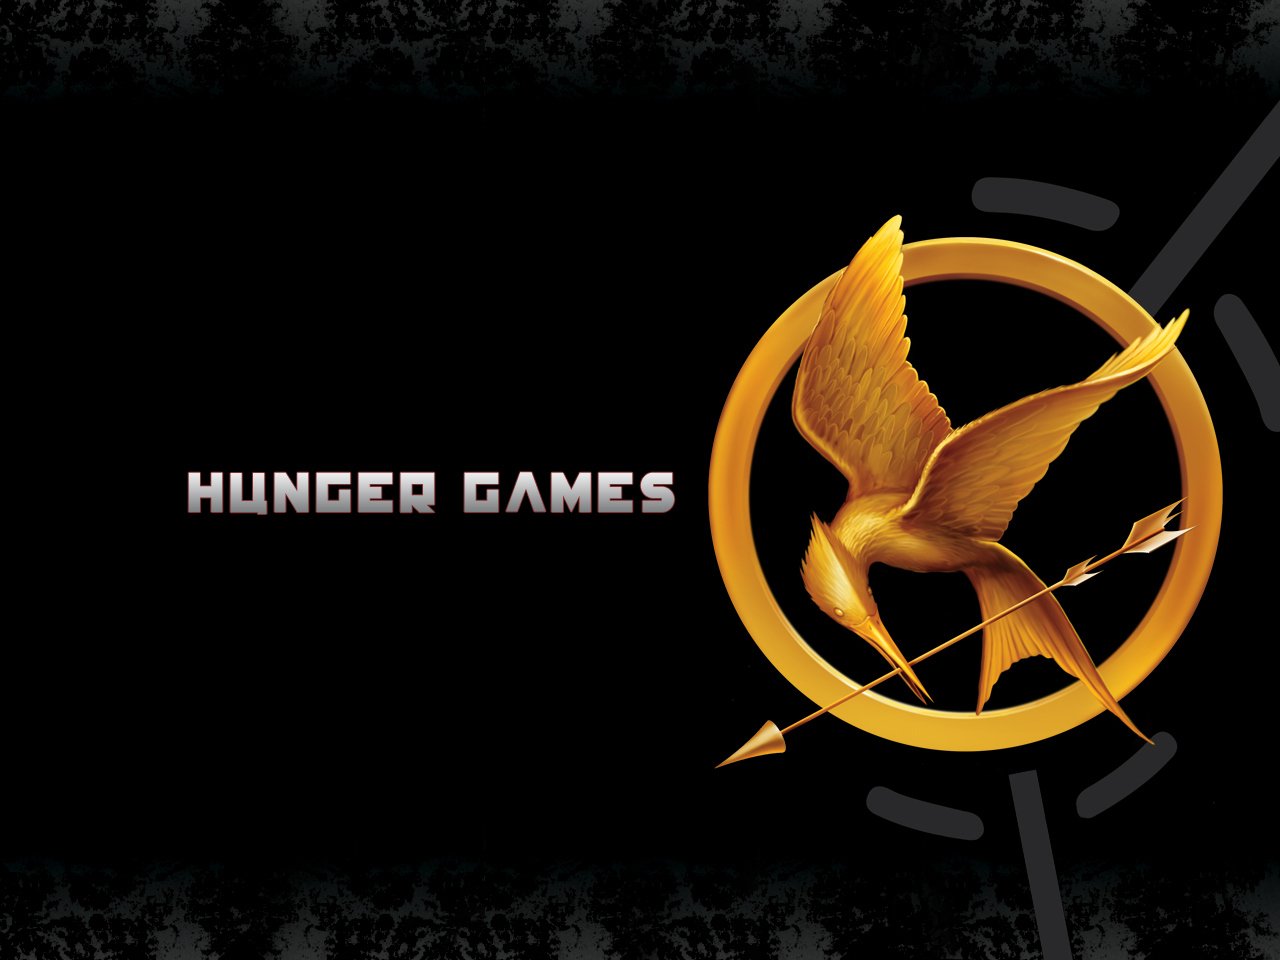 The Hunger Games, Hit or Hype?